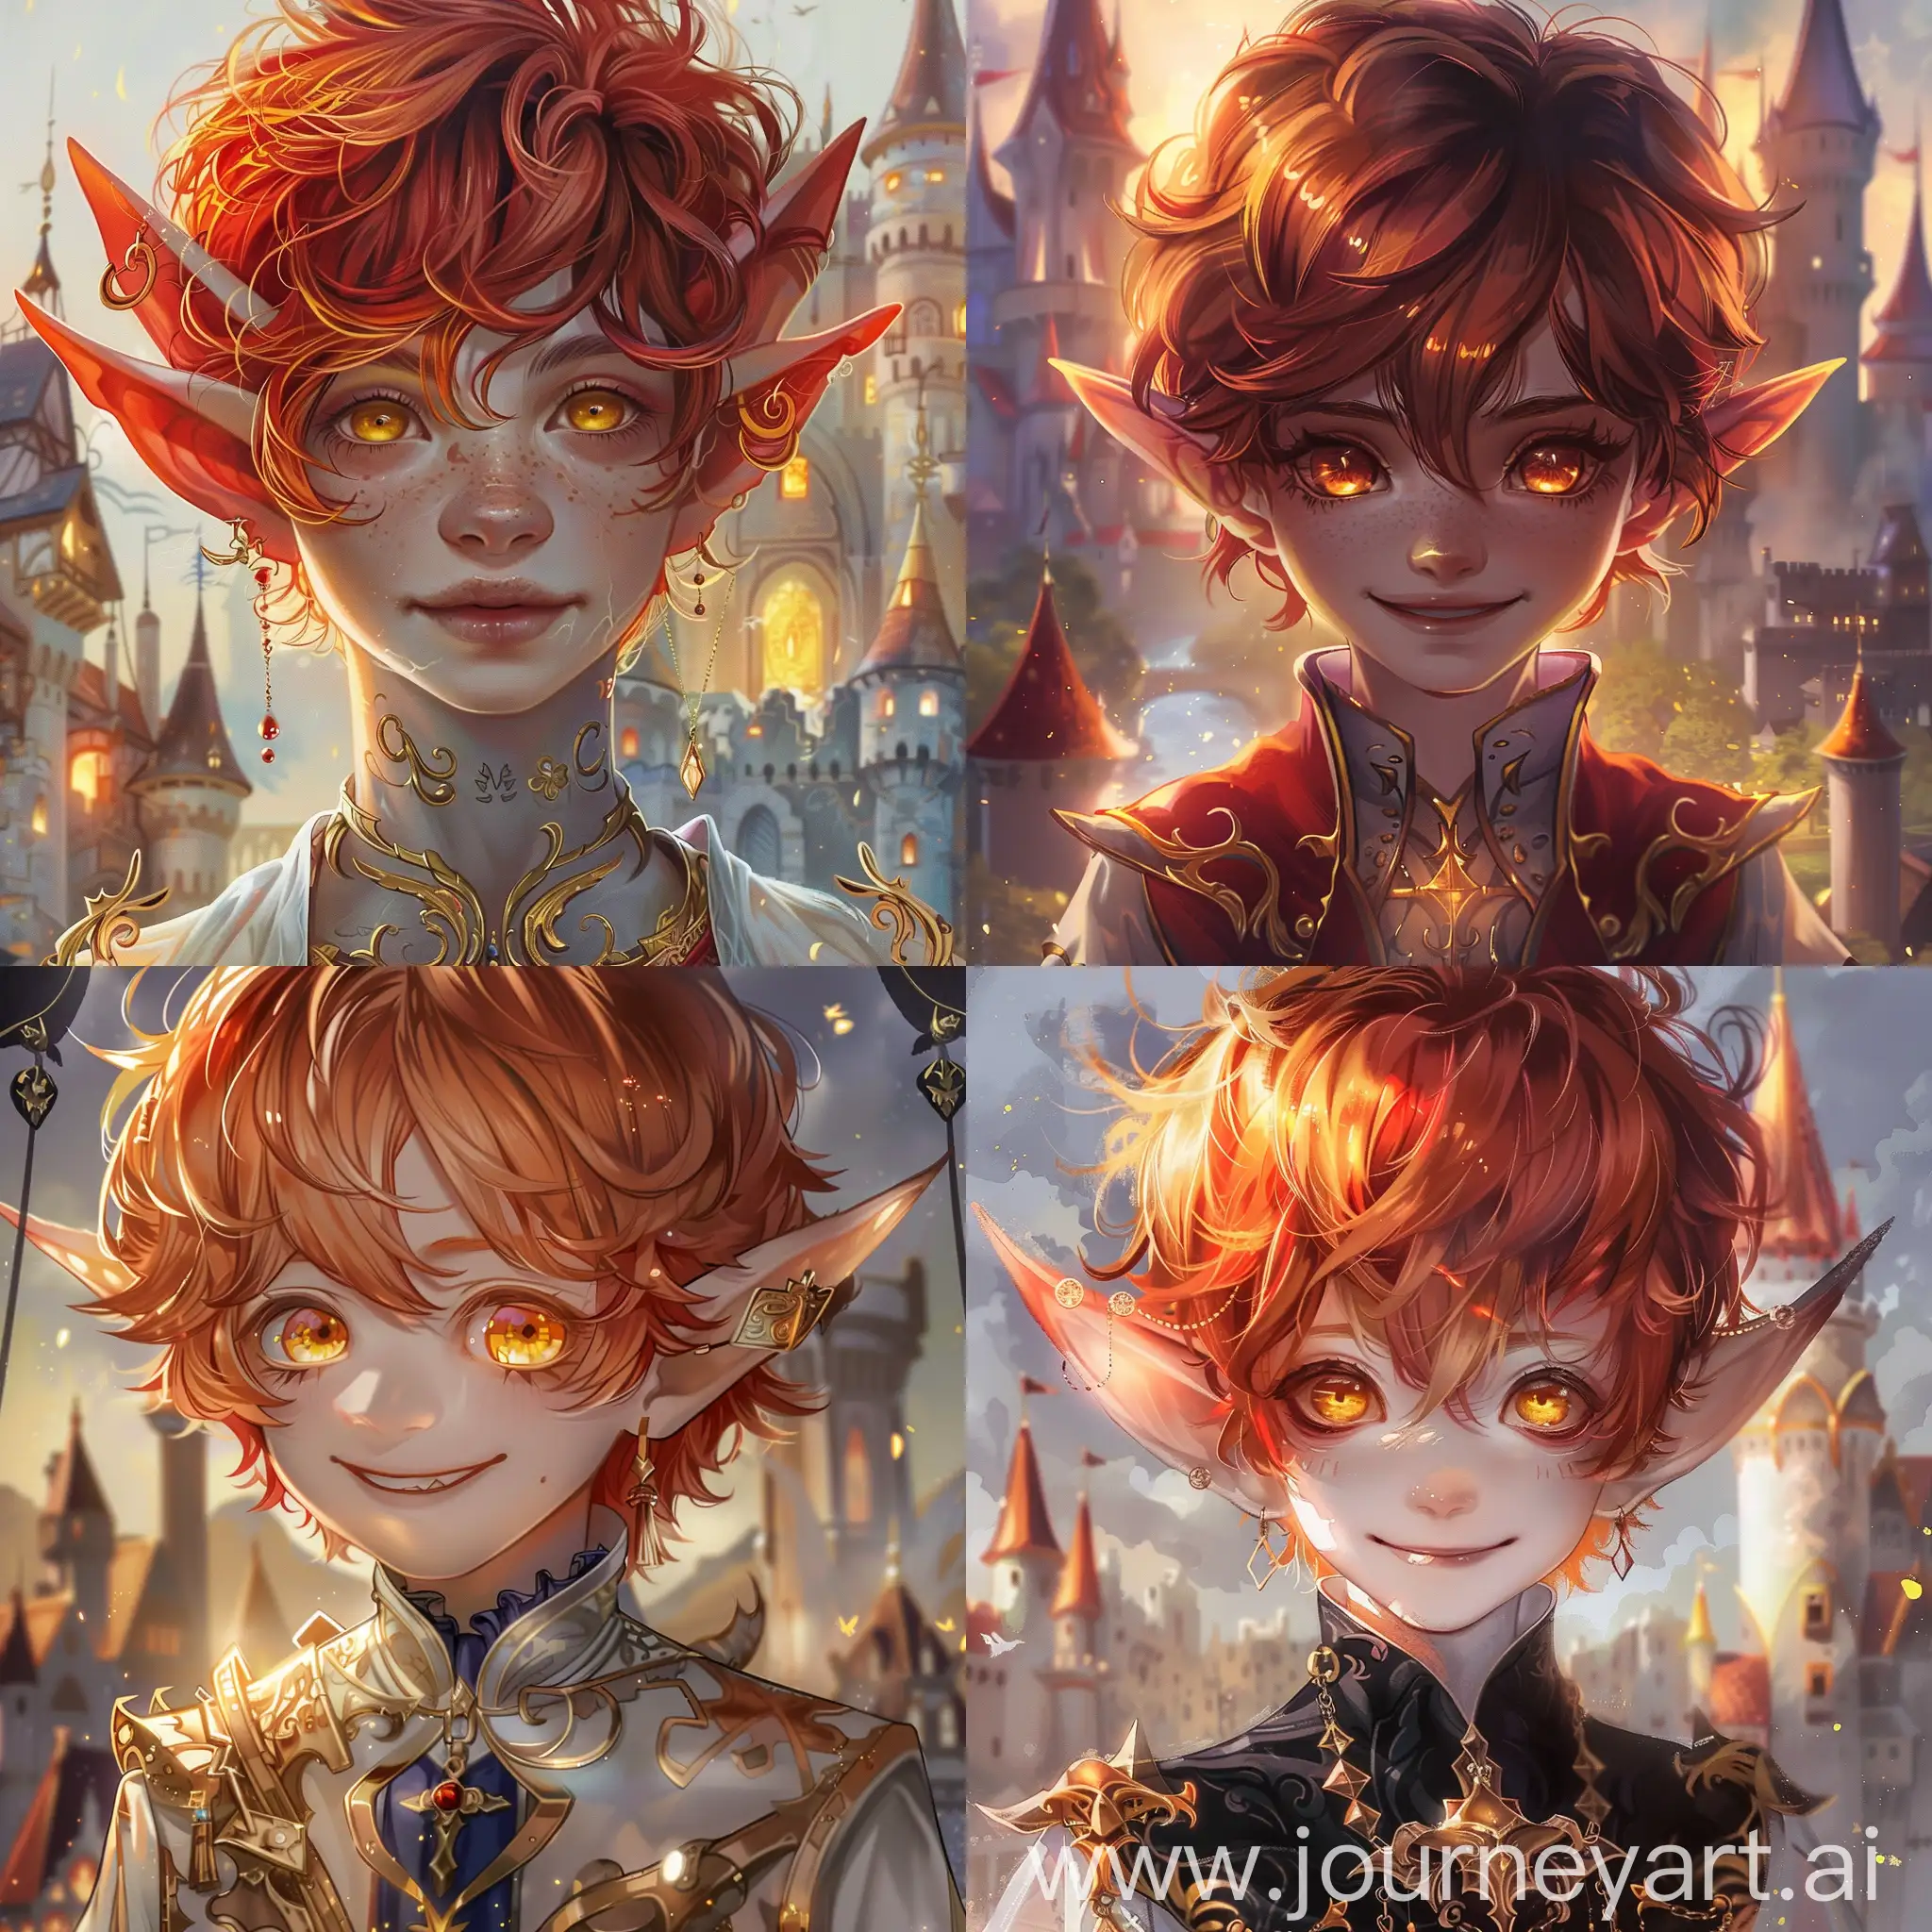 Enchanting-Anime-Boy-with-Ethereal-Golden-Eyes-and-Mischievous-Smile-in-Fantasy-Castle-Setting